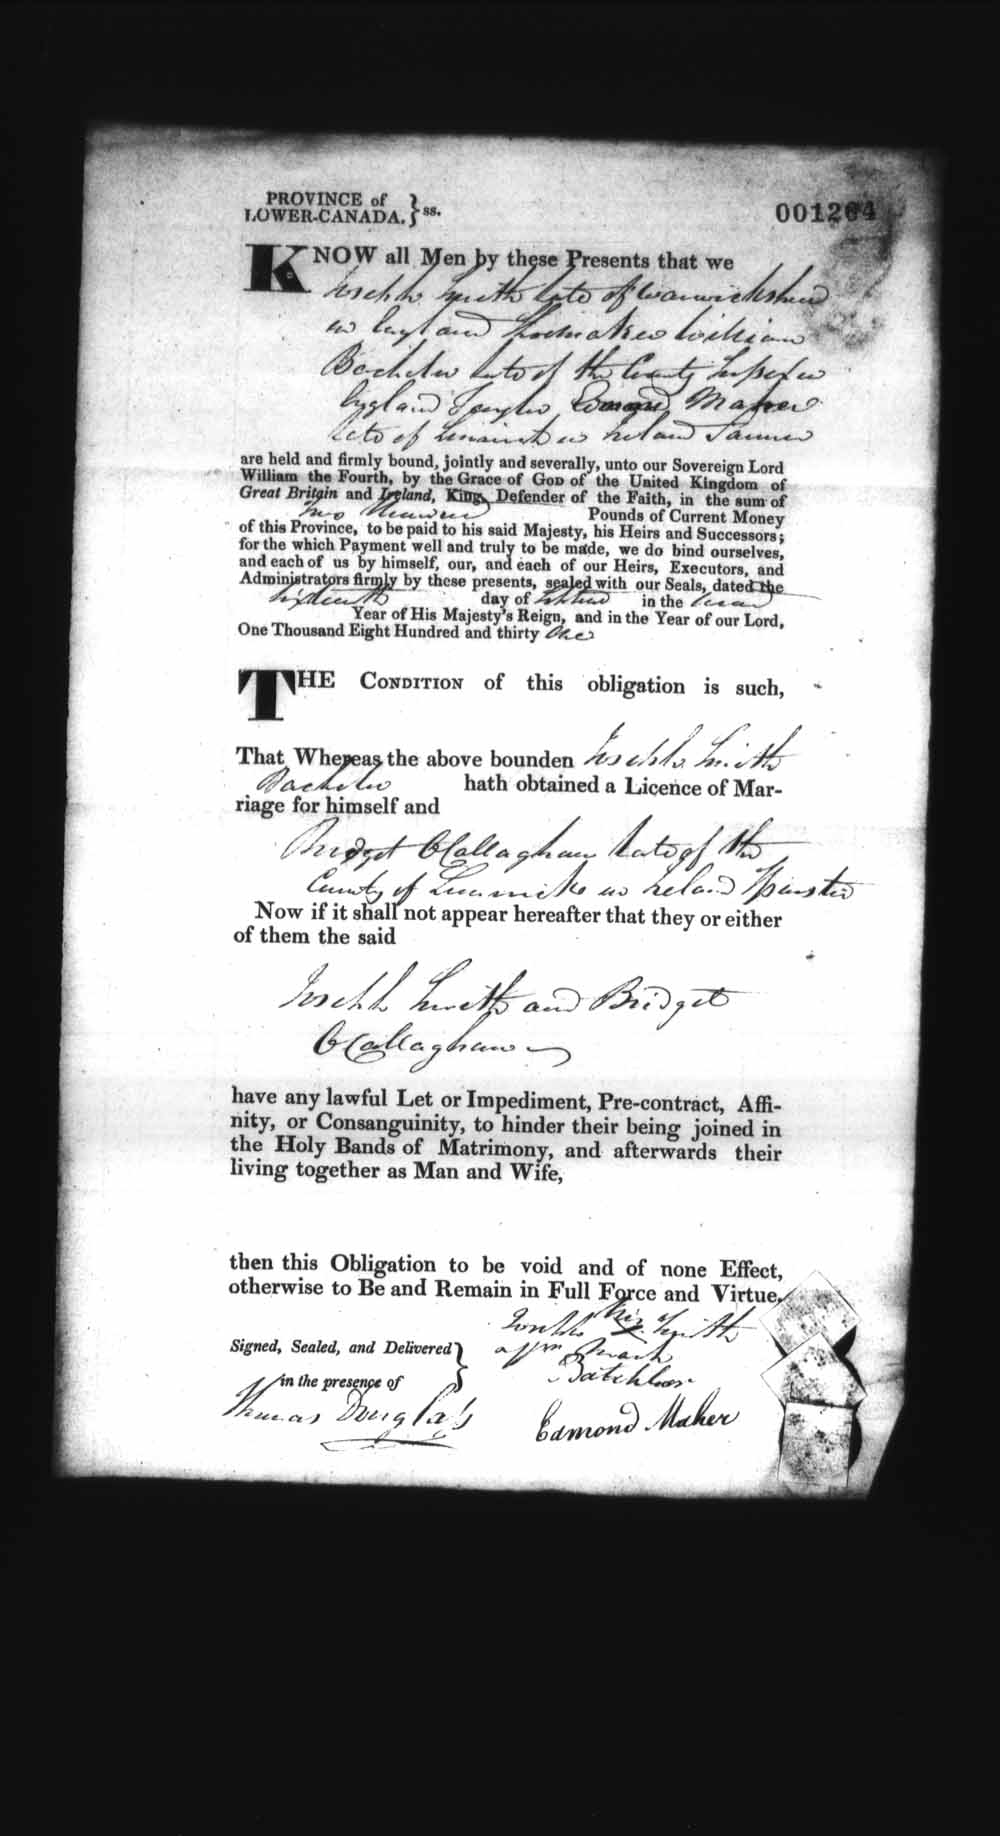 Digitized page of Upper and Lower Canada Marriage Bonds (1779-1865) for Image No.: e008237436